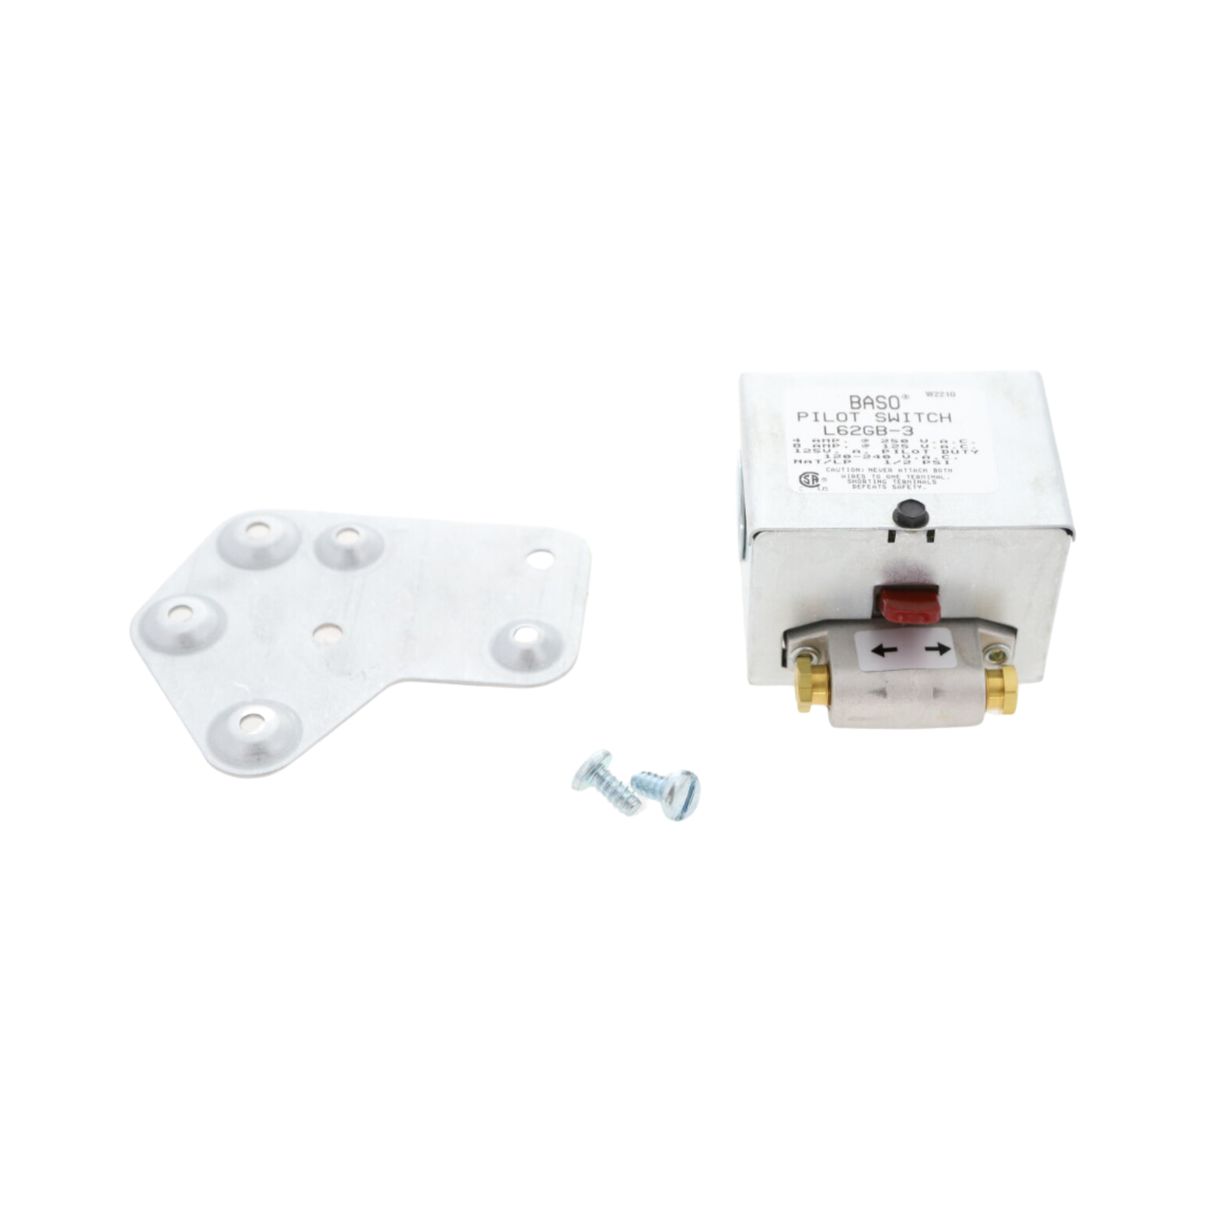 Baso L62GB-3 1/4" Gas Connection, Manual Reset, SPST Pilot Safety Switch with 100% Shutoff and Universal Mounting Plate